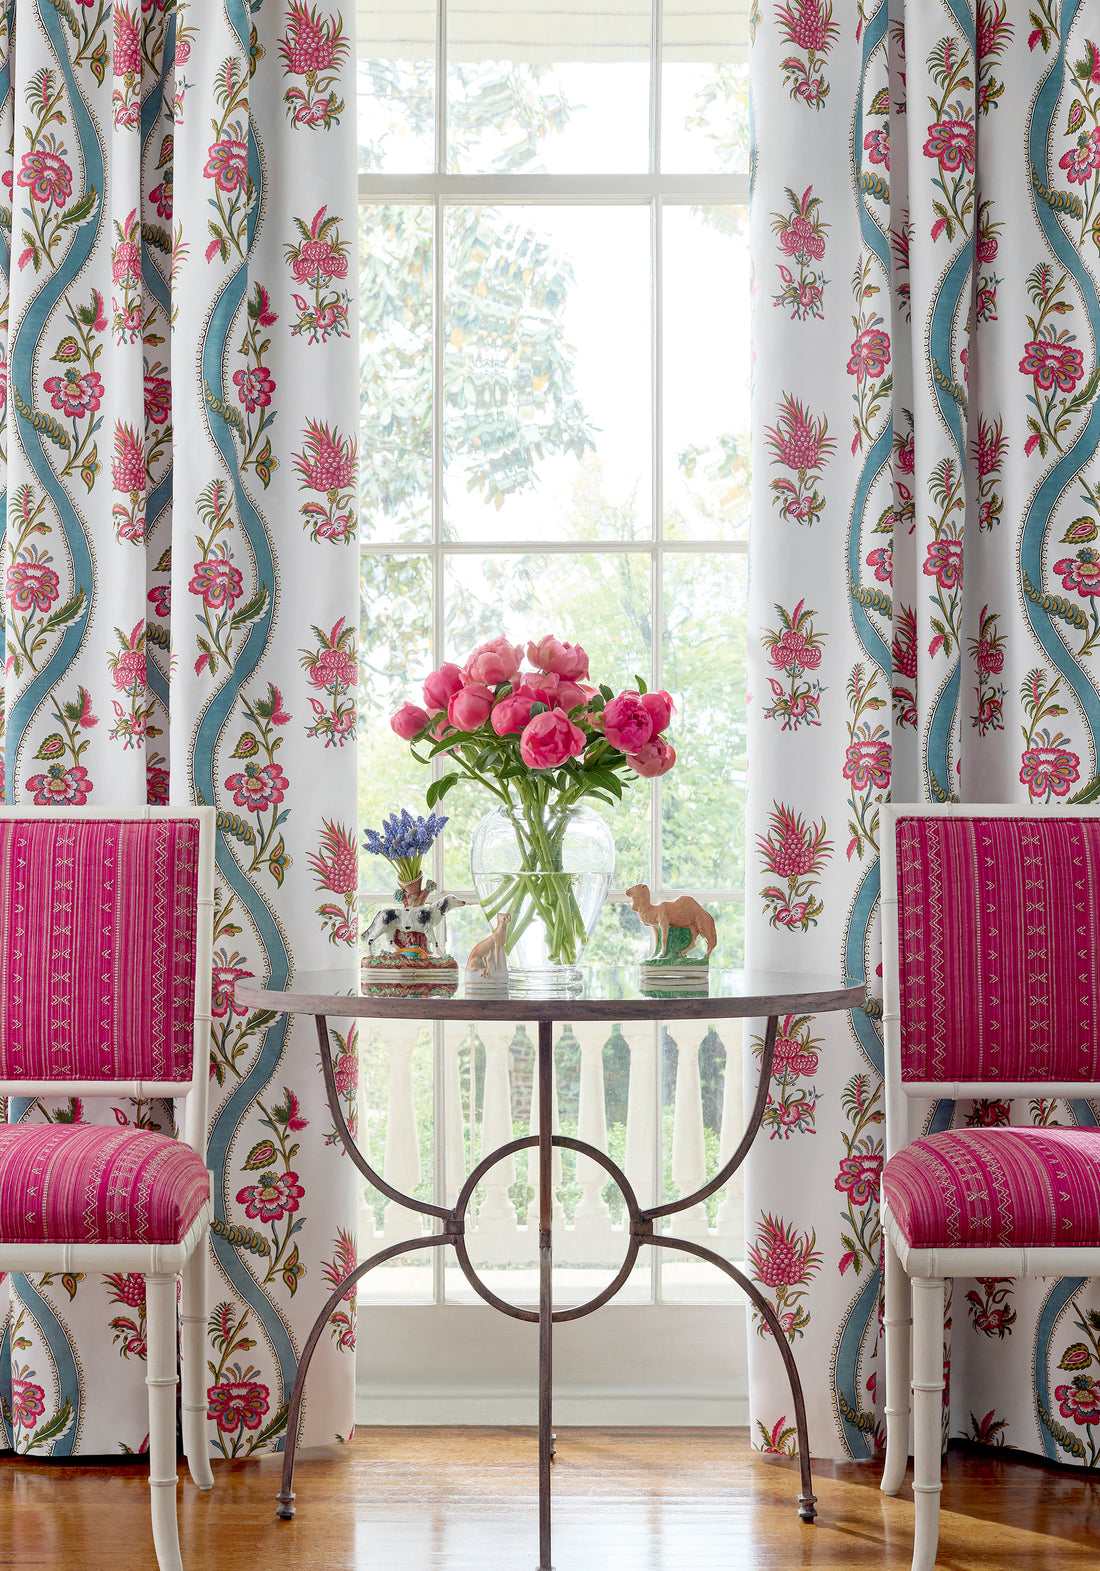 Curtains featuring Ribbon Floral fabric in raspberry and teal color - pattern number F936426 - by Thibaut in the Indienne collection